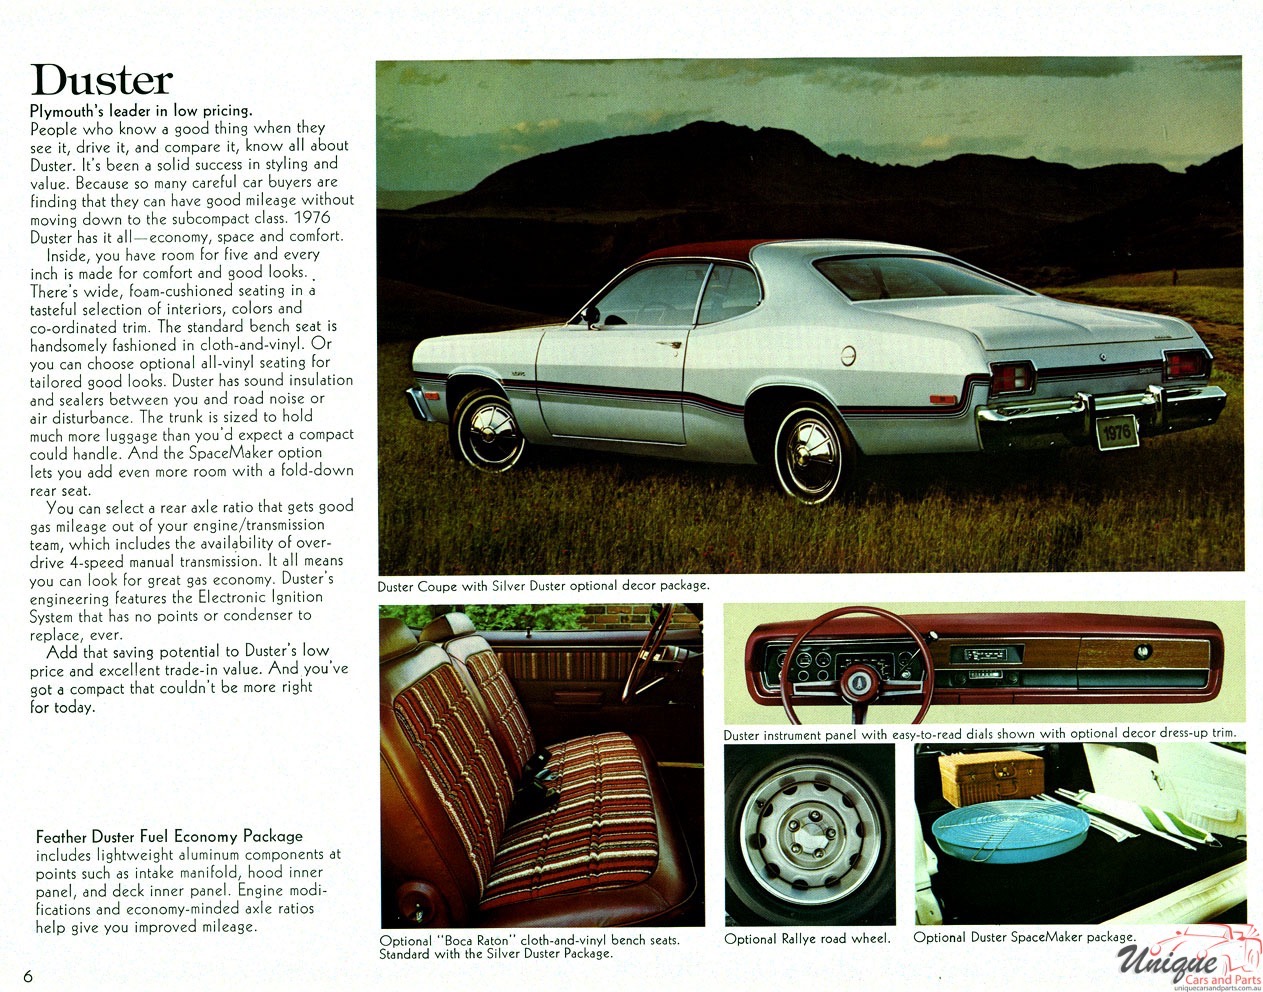 1976 Chrysler-Plymouth Brochure Page 6